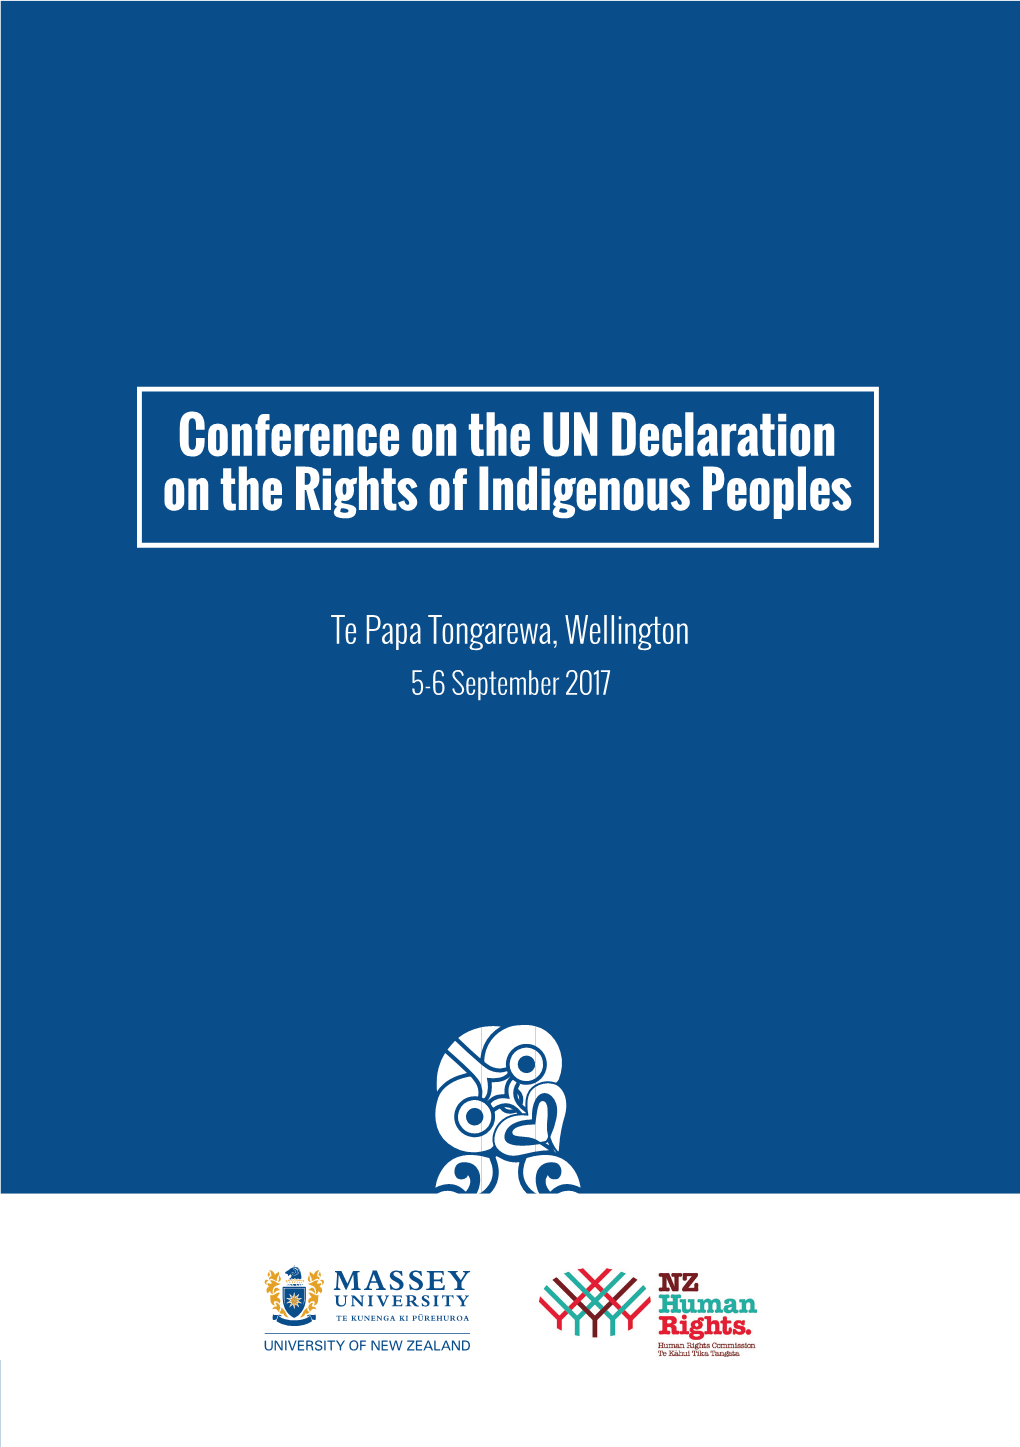 Conference on the UN Declaration on the Rights of Indigenous Peoples